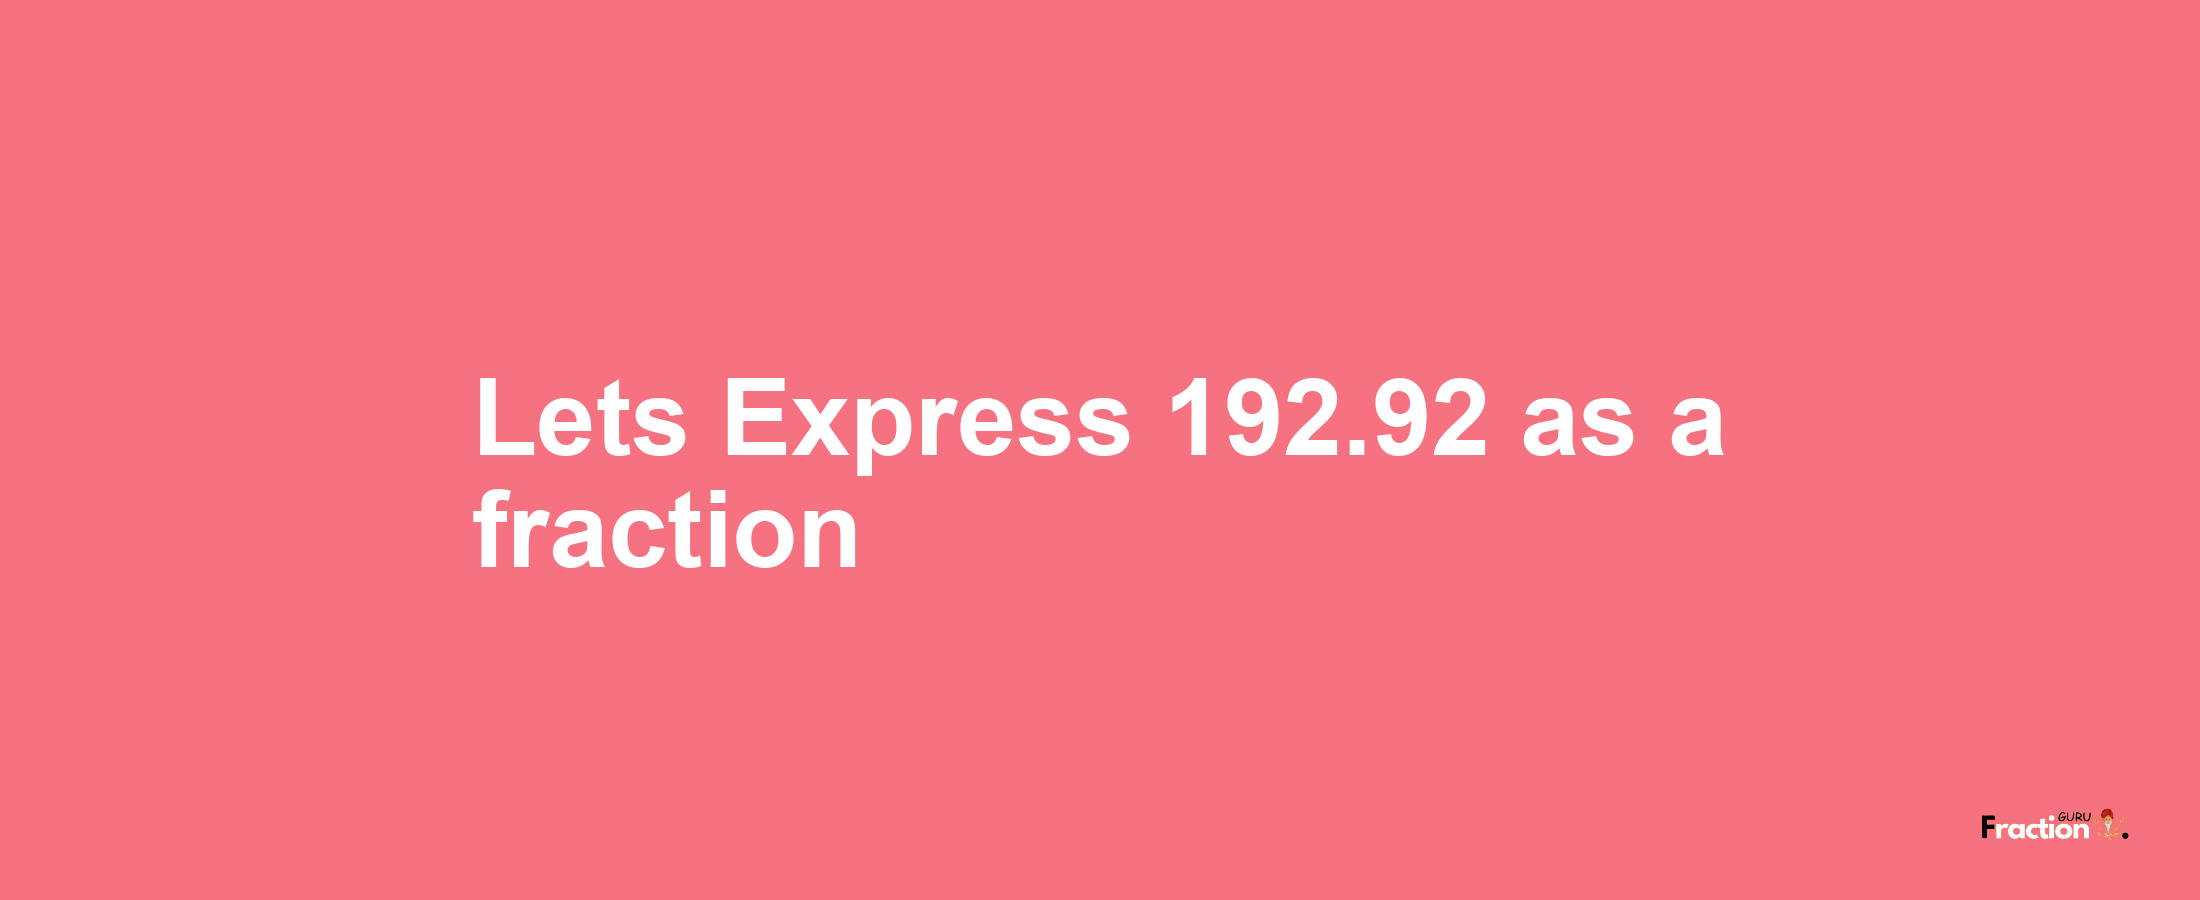 Lets Express 192.92 as afraction